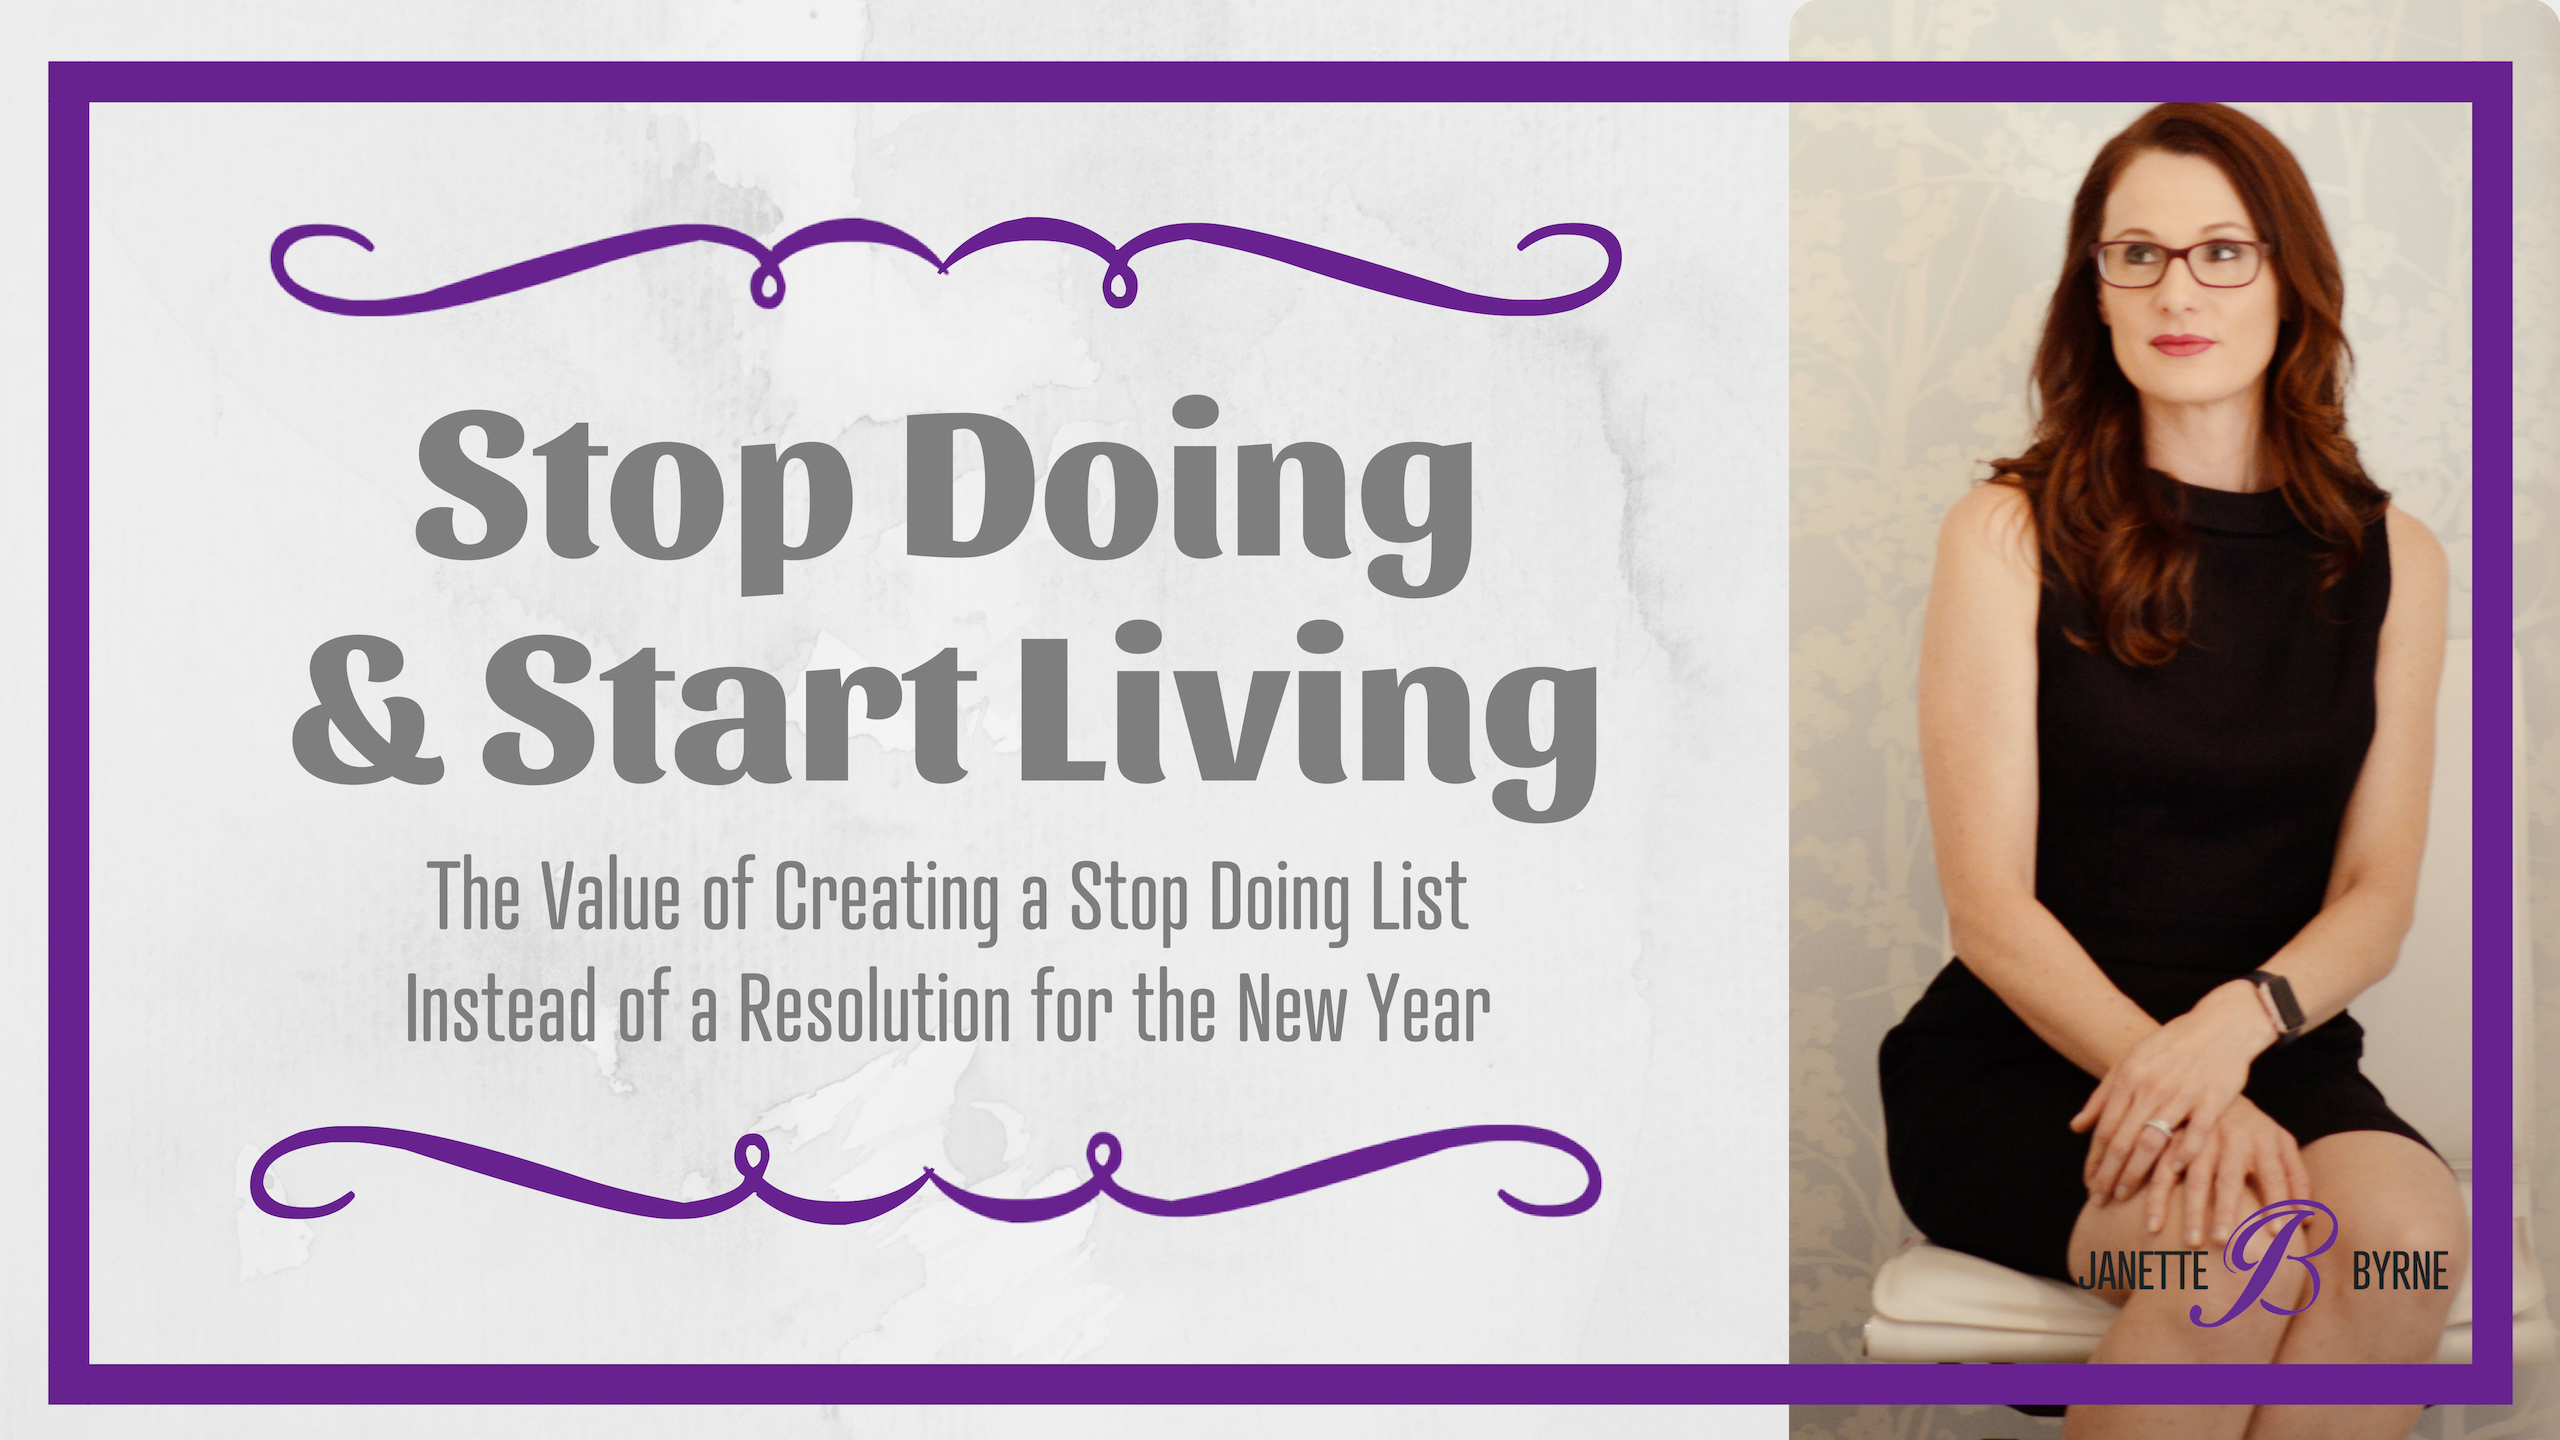 Stop Doing & Start Living – The Value of Creating a Stop Doing List Instead of a Resolution for the New Year